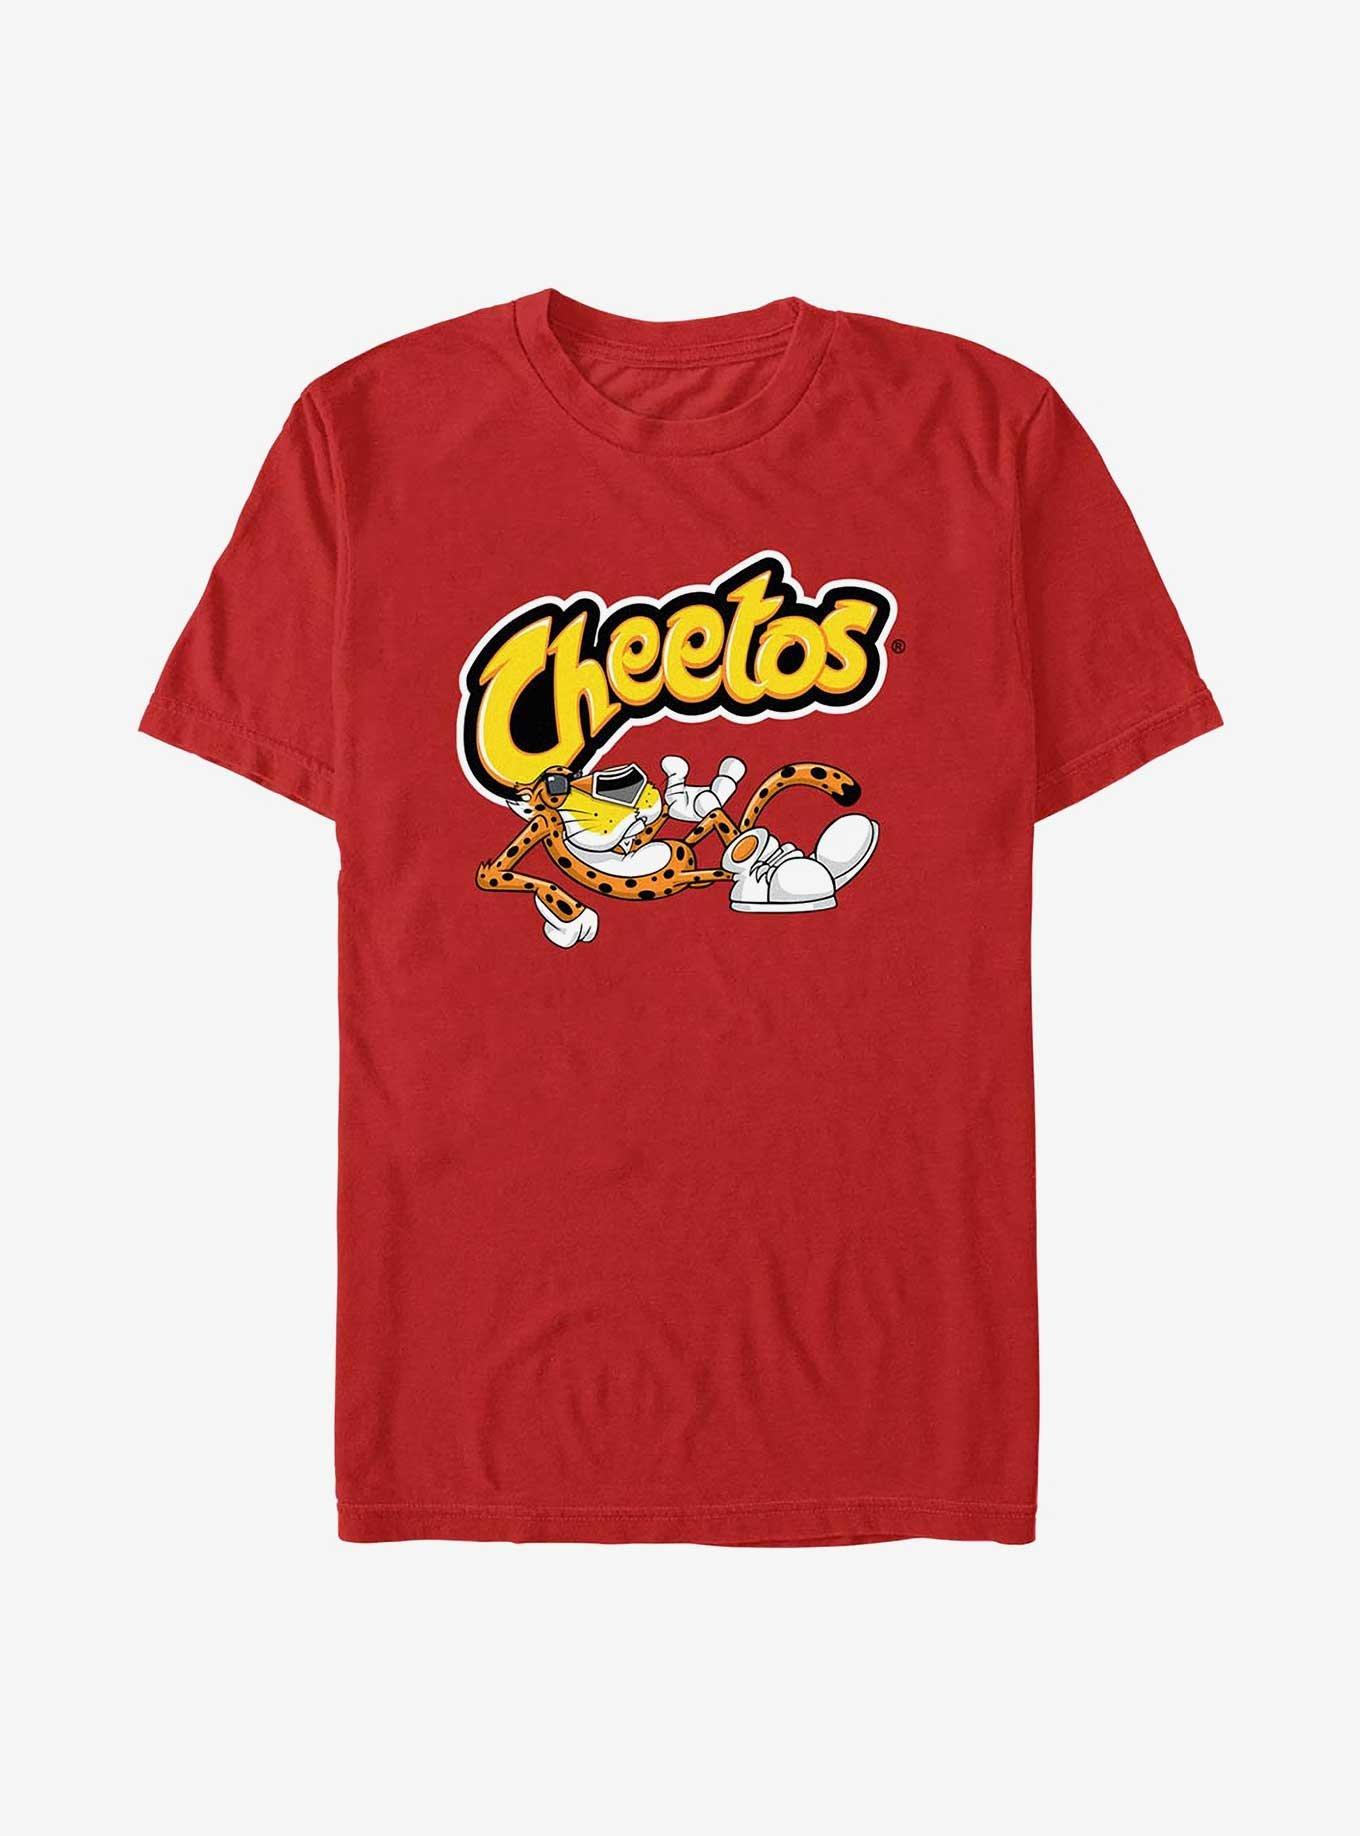 Cheetos Chester Recline T-Shirt, RED, hi-res